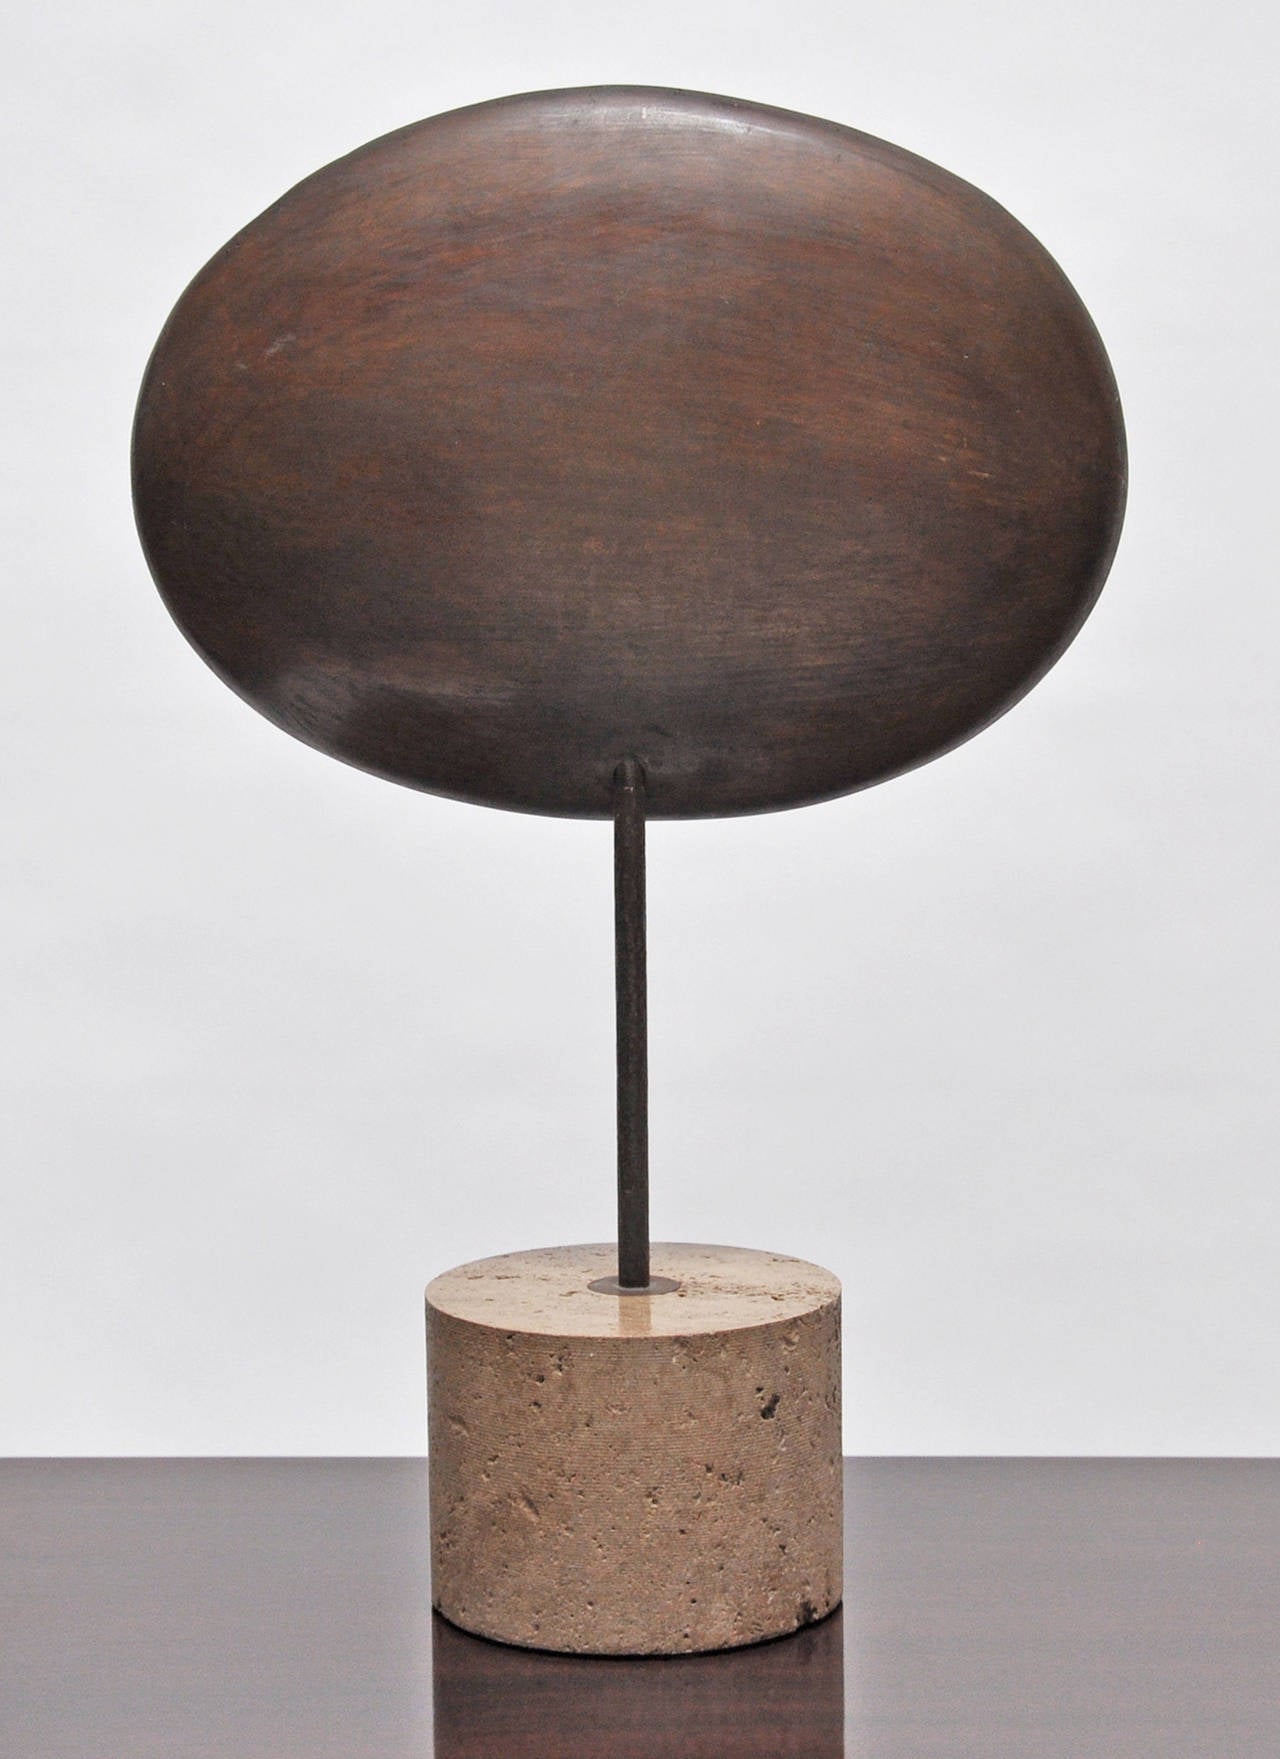 Modernist bronze sculpture by Amalia Schulthess (American 1918-). Mounted on a travertine base.
Amalia Schulthess was the subject of a retrospective at the Santa Barbara Museum of Art in 1976.
Measures: The depth of the sculpture is 3 inches.
The